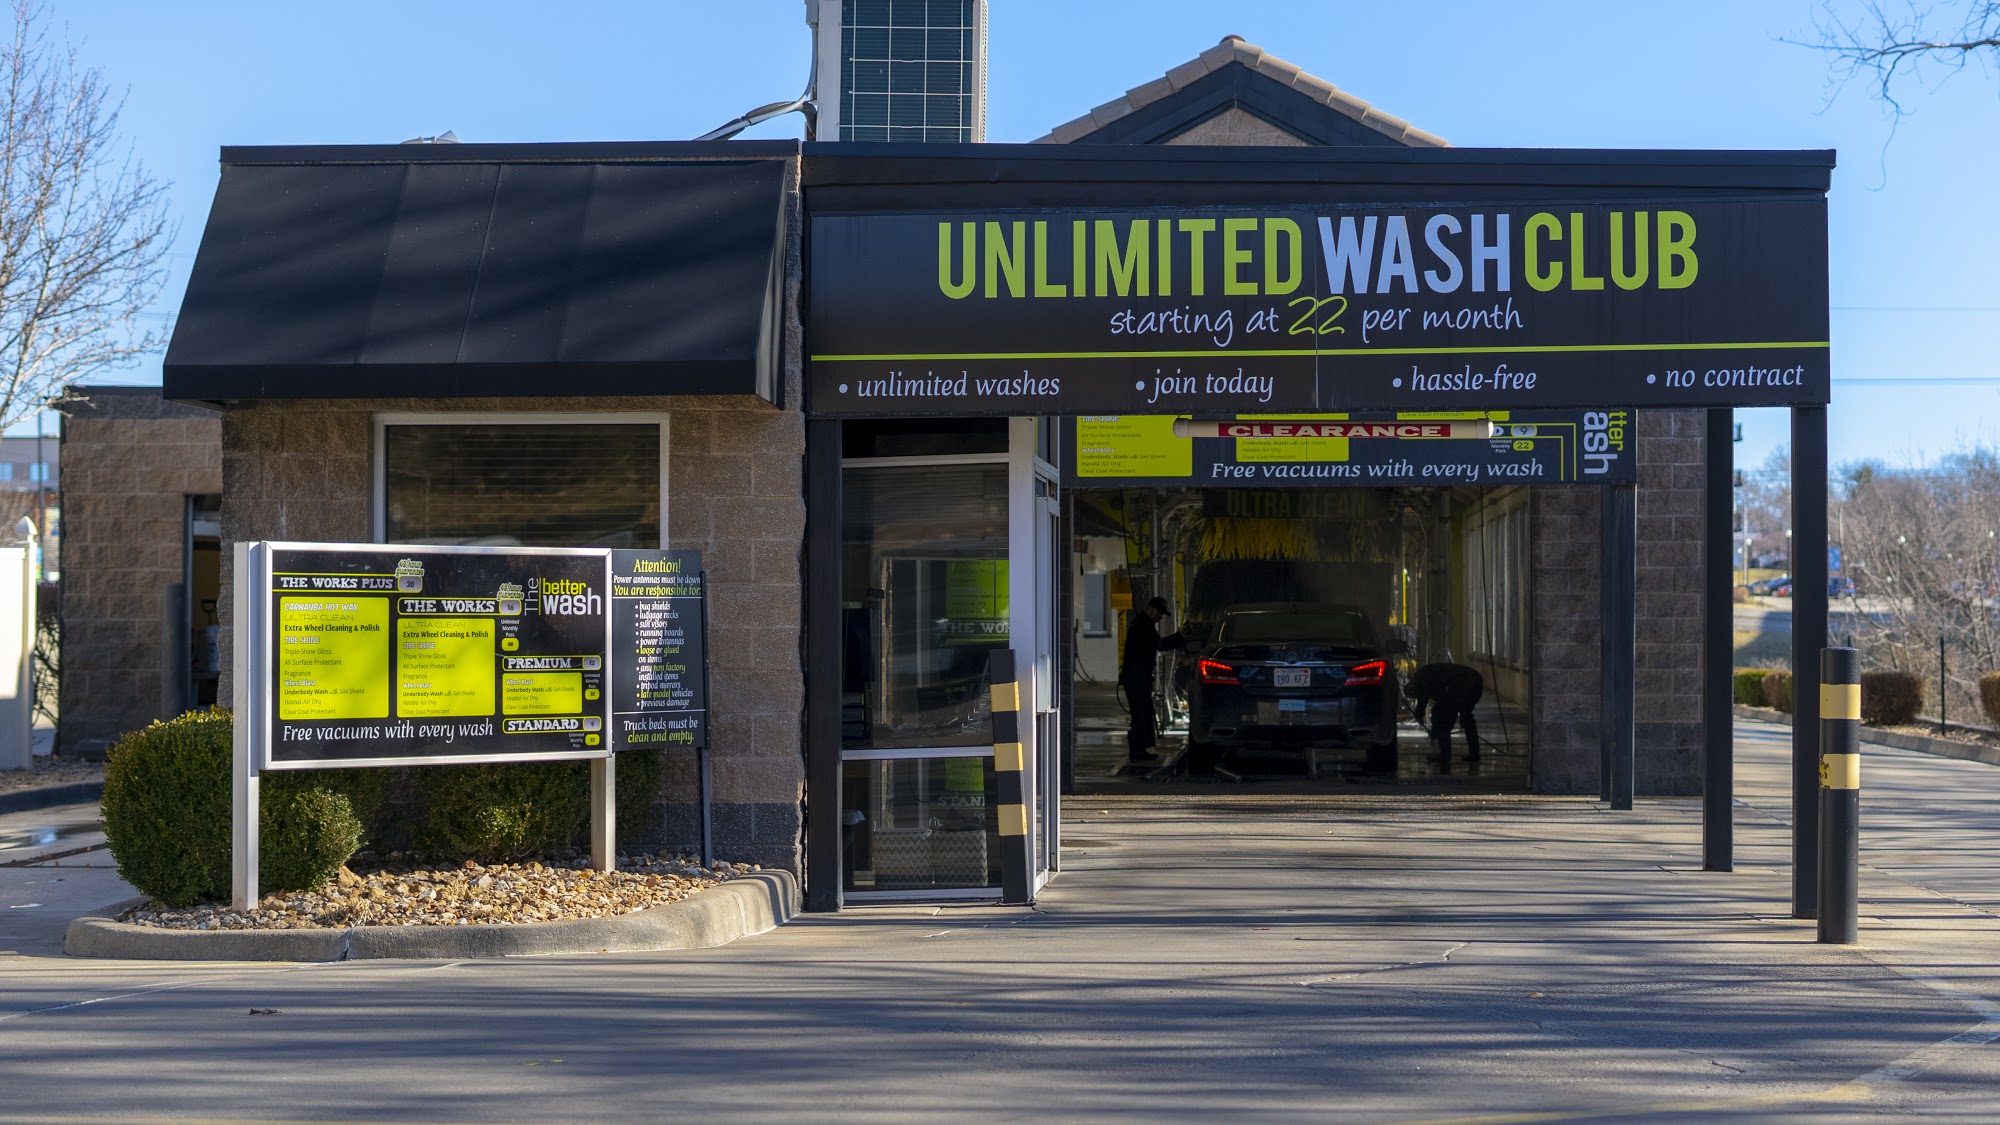 The Better Wash - Gladstone Express Tunnel Car Wash